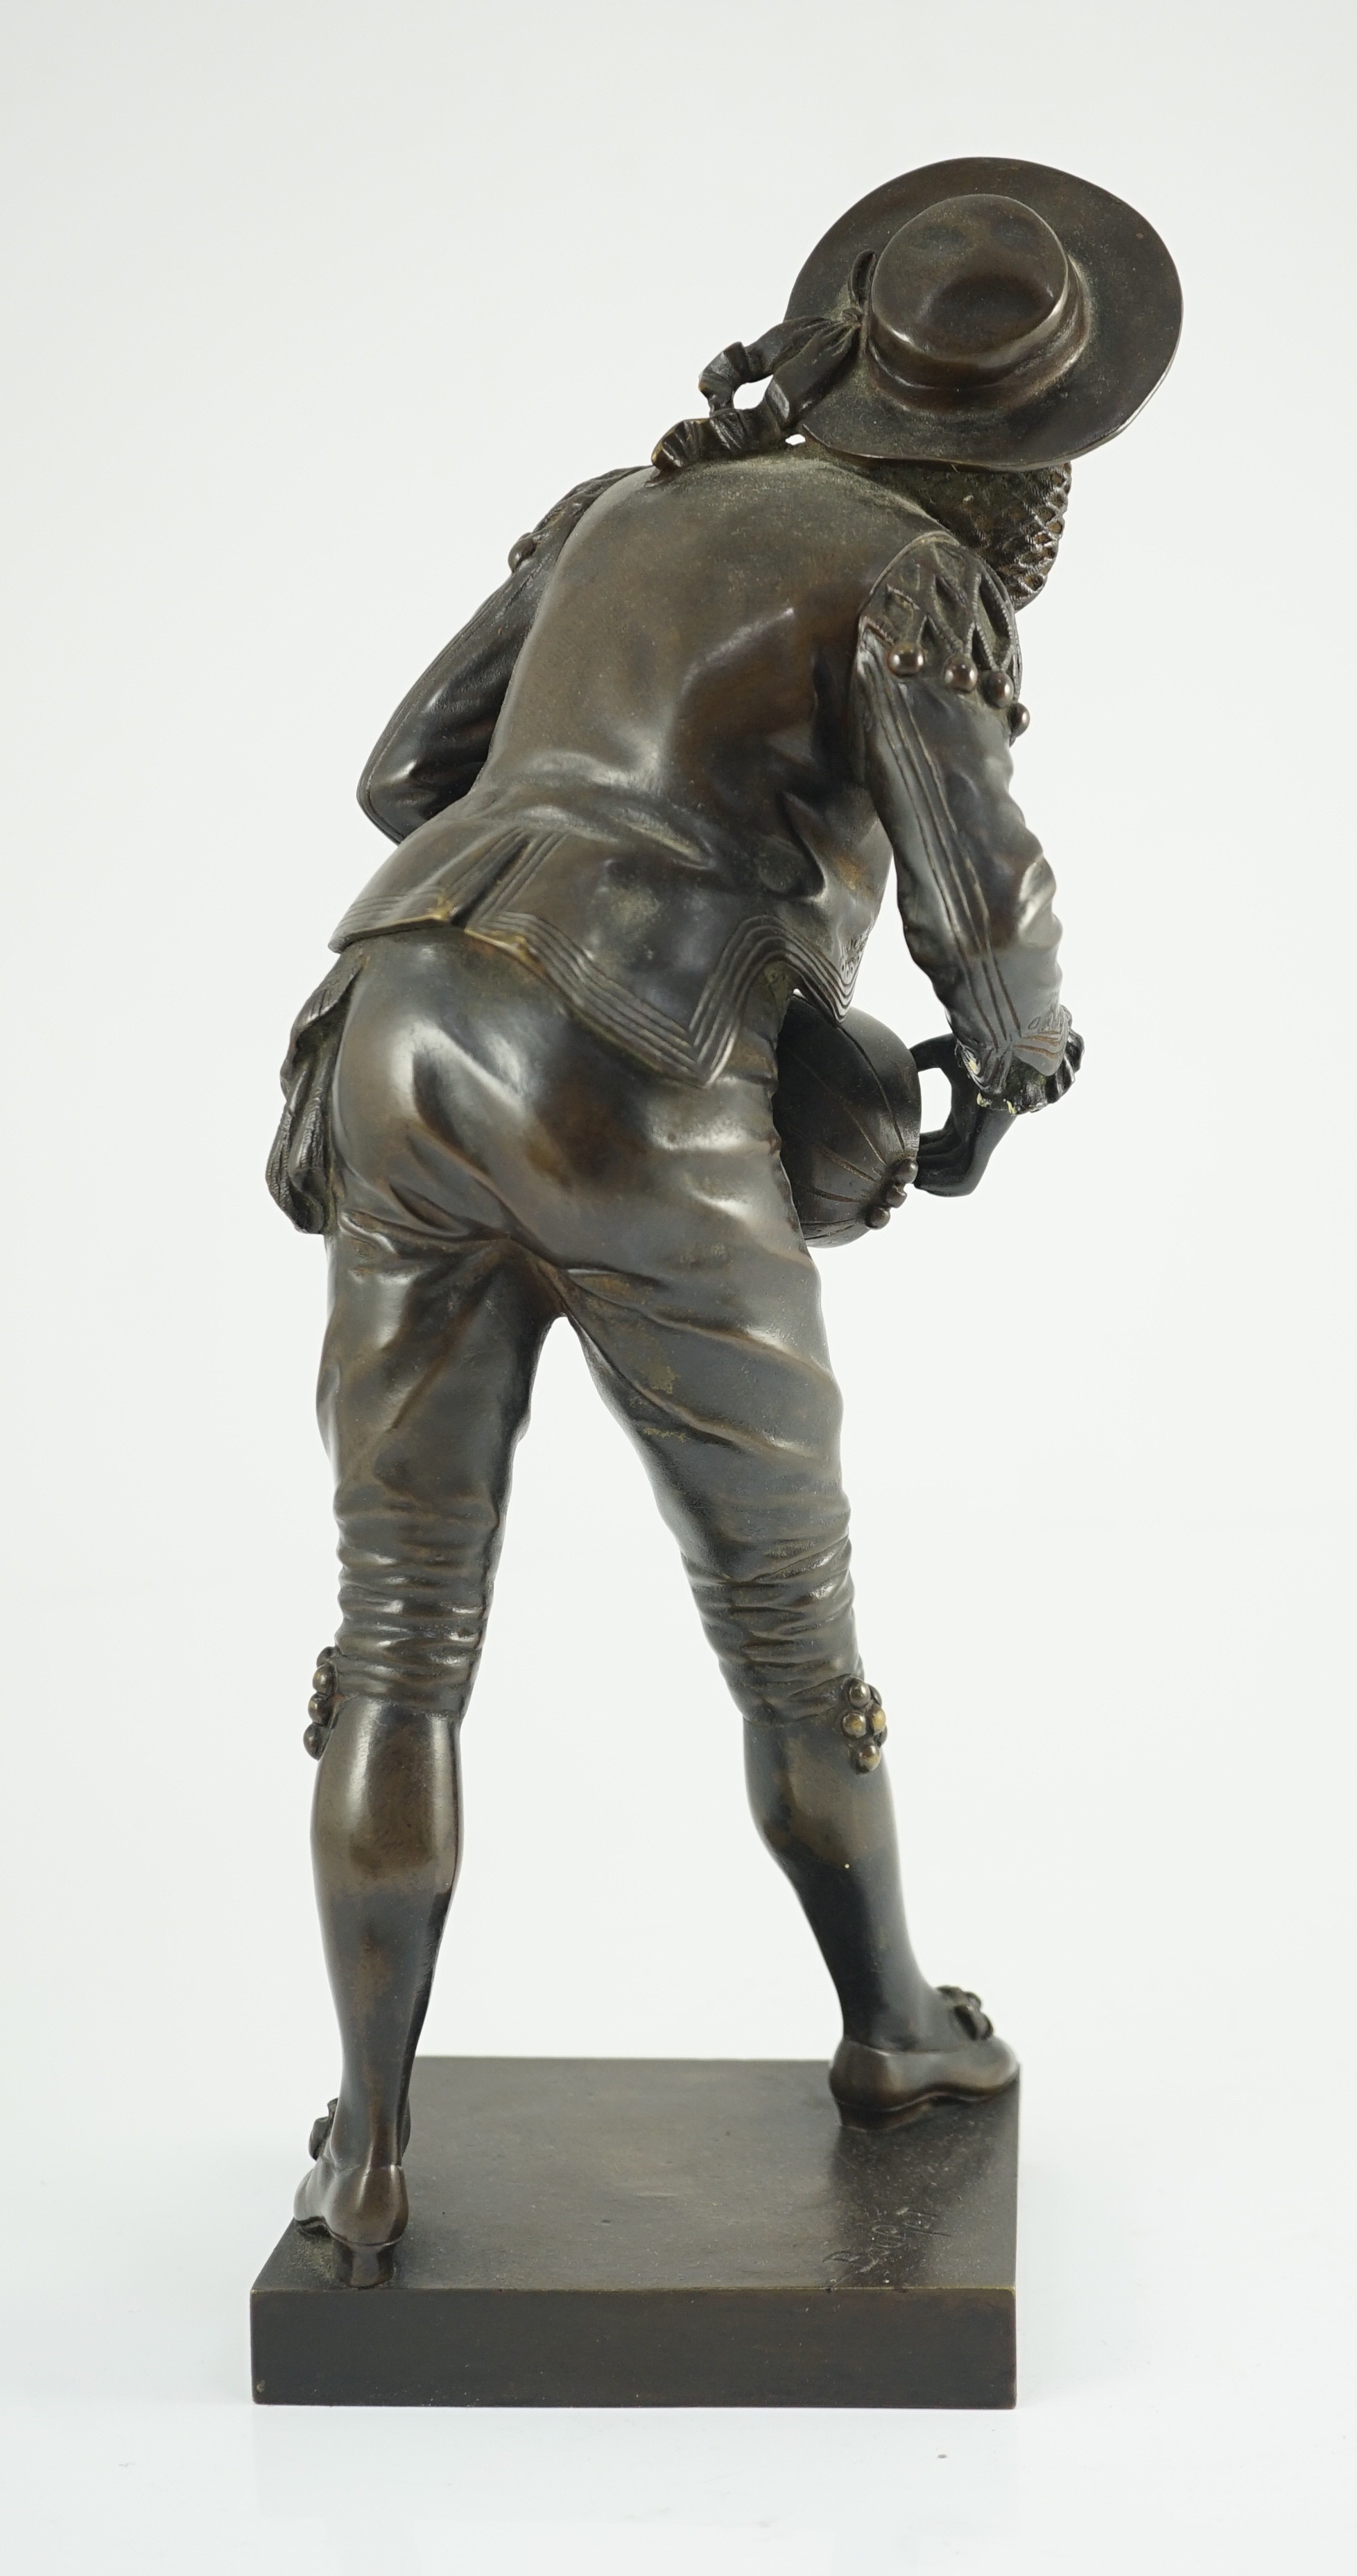 Eutrope Bouret (French, 1833-1906). A bronze figure of 'Figaro', standing playing a mandolin, signed - Image 6 of 9